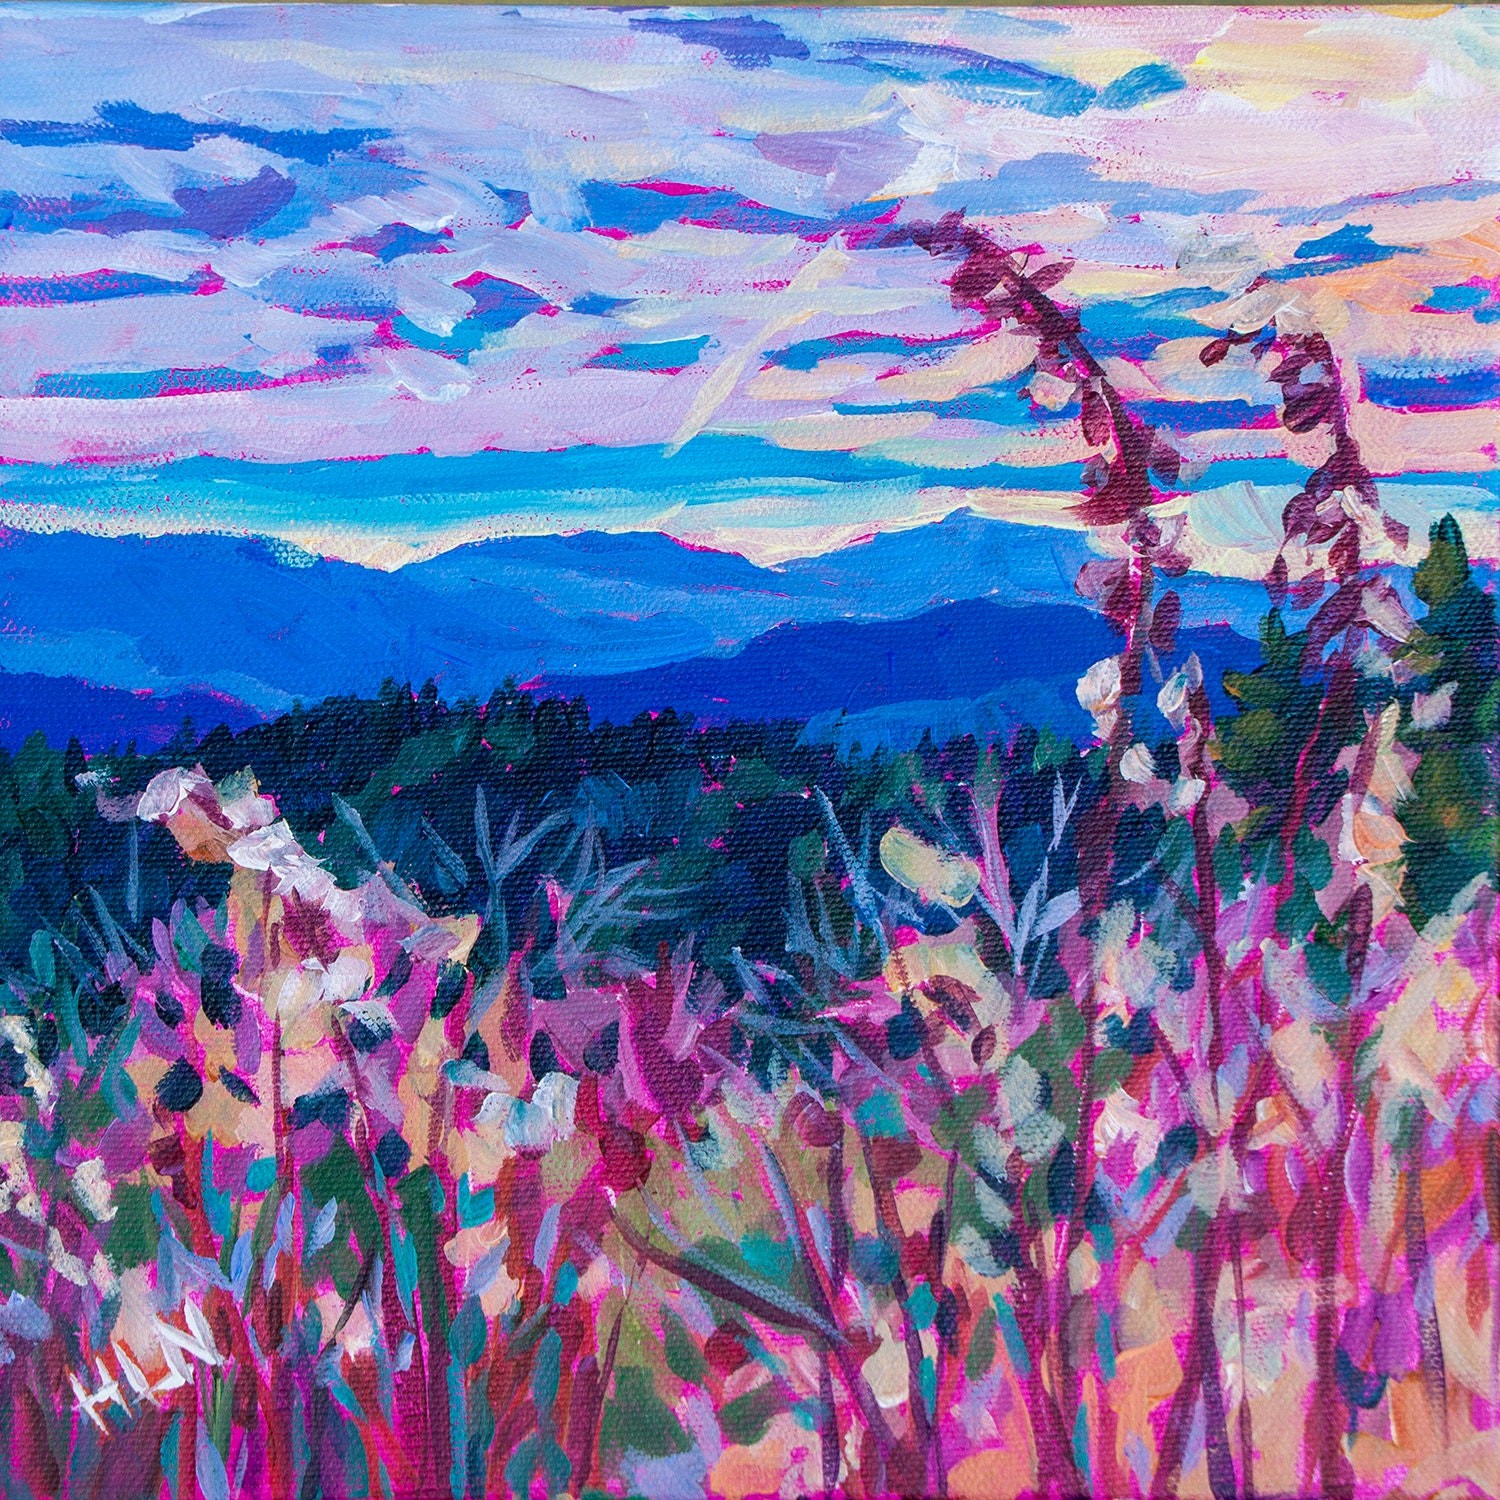 Blue smoky mountains with grass and flowers in the foreground